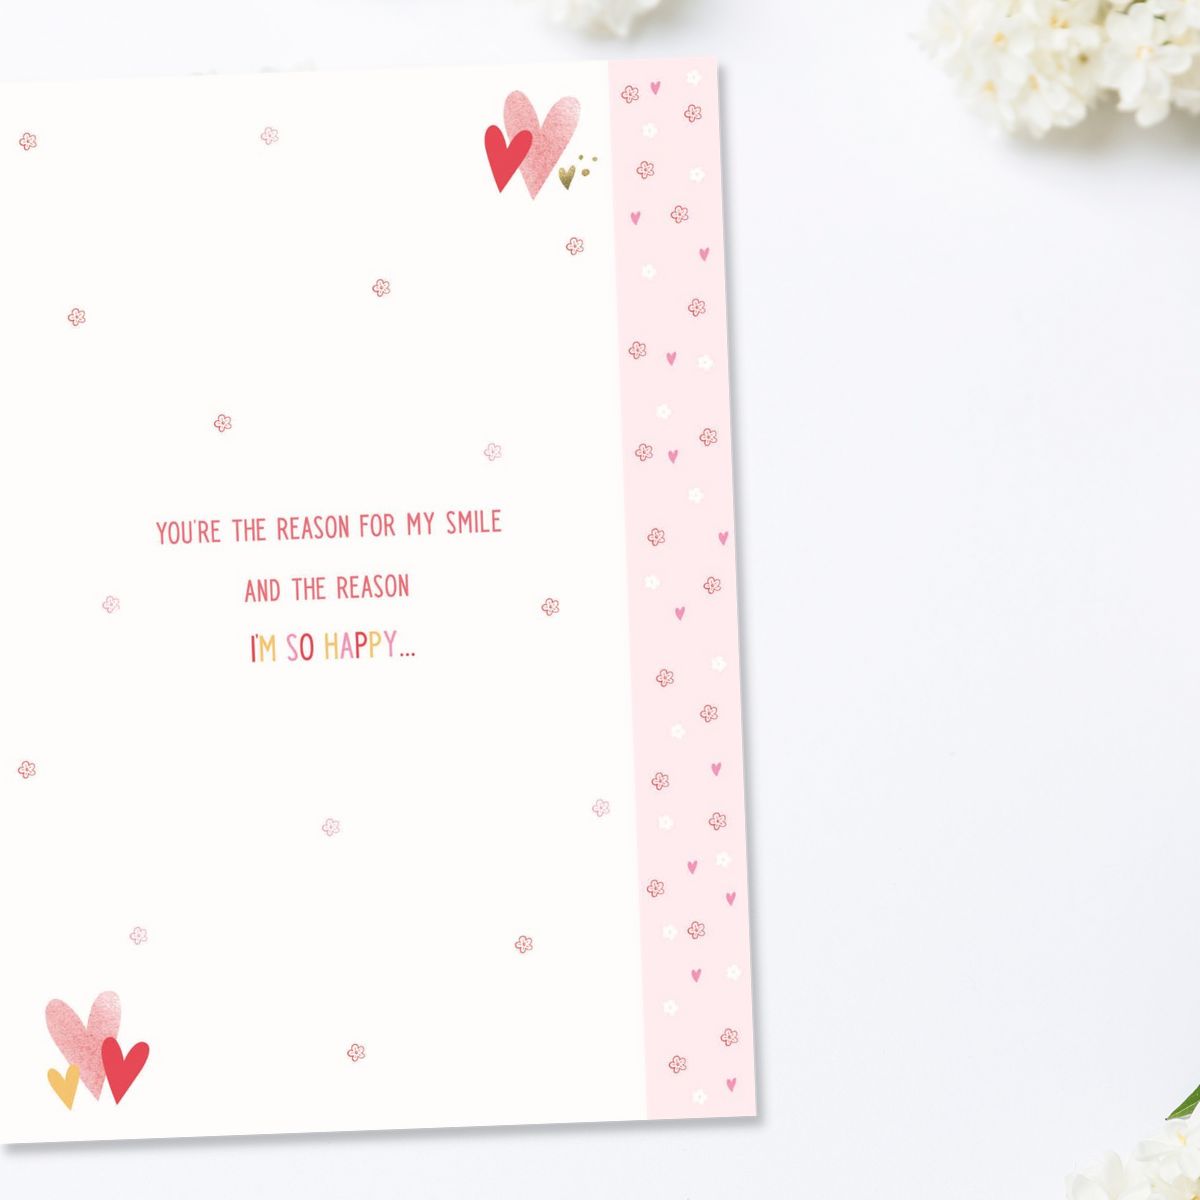 Inside image with full colour print and hearts and floral borders